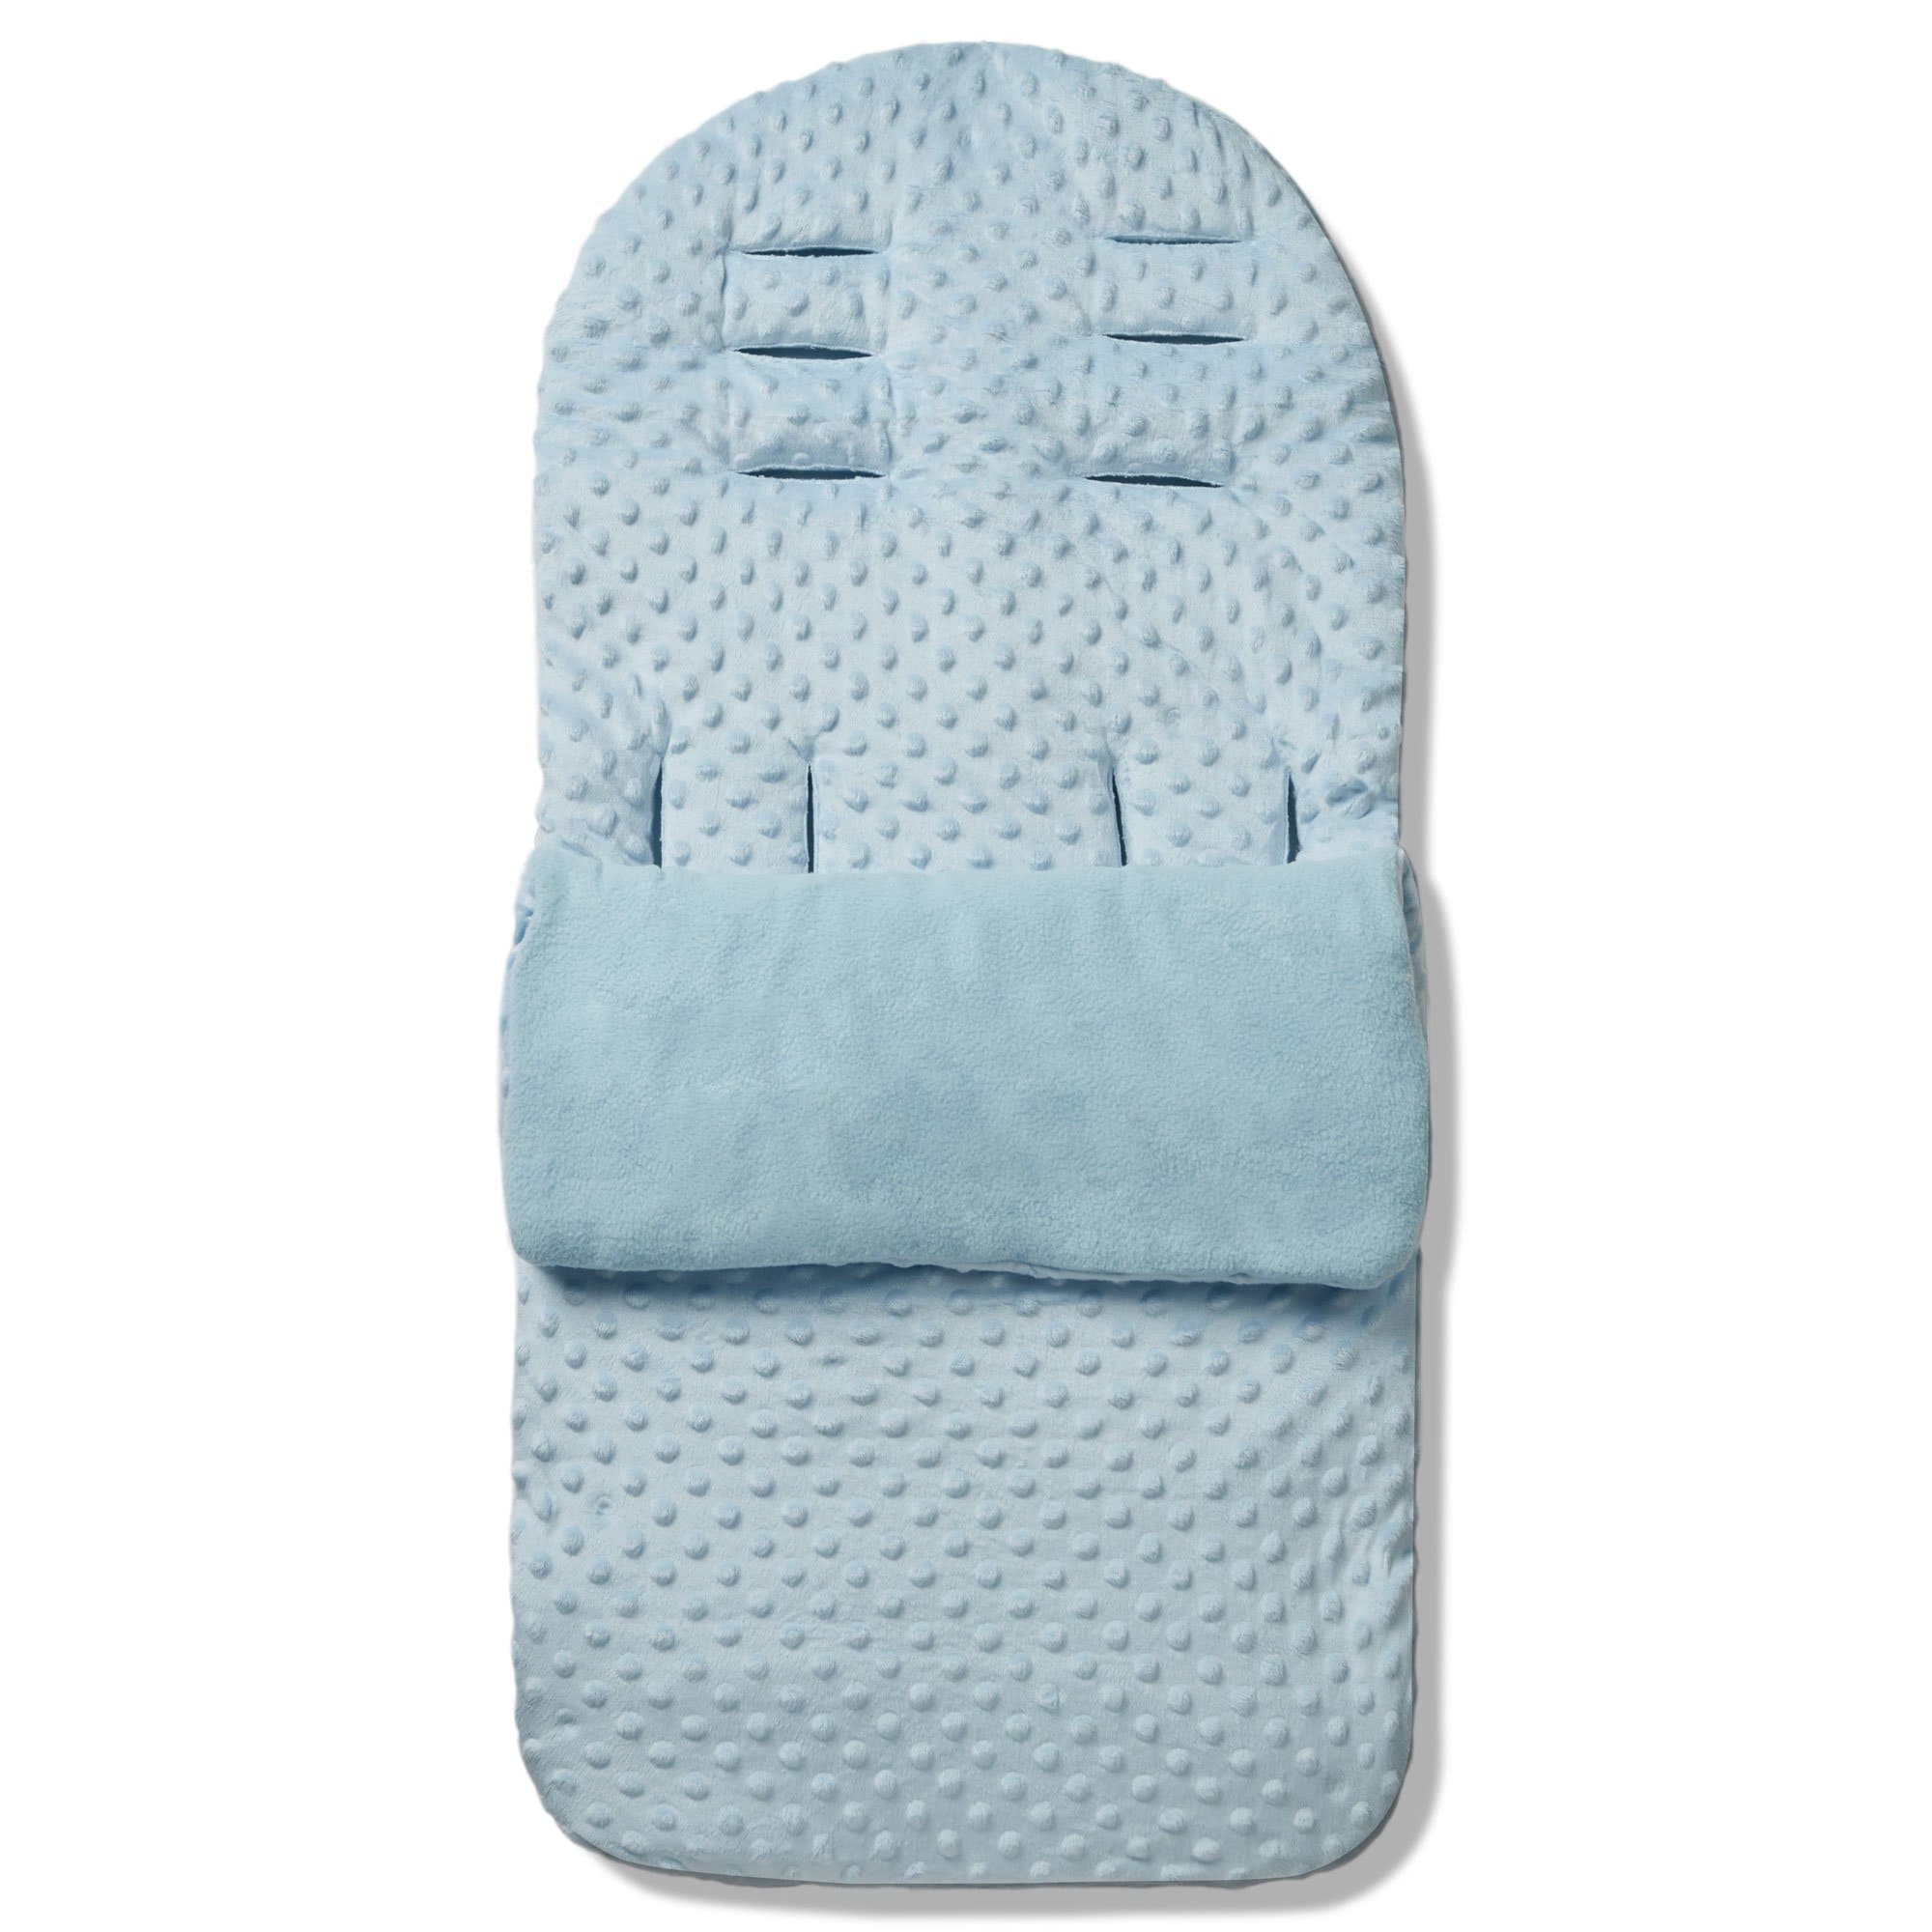 Dimple Footmuff / Cosy Toes Compatible with Mothercare - Blue / Fits All Models | For Your Little One